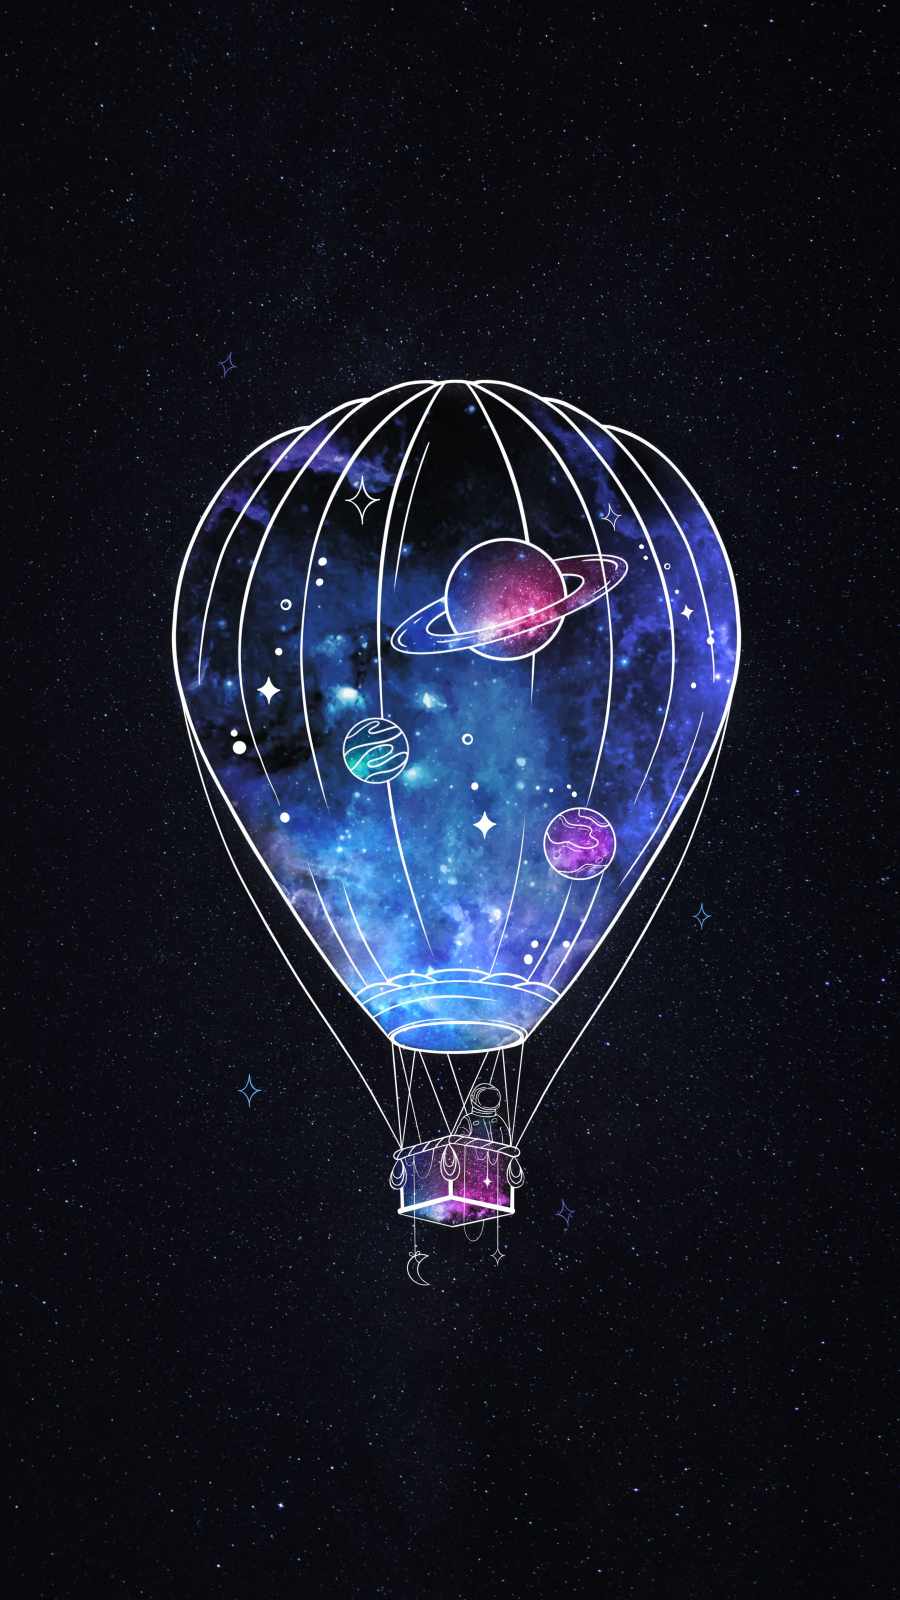 Hot Air Balloon in Space iPhone Wallpaper